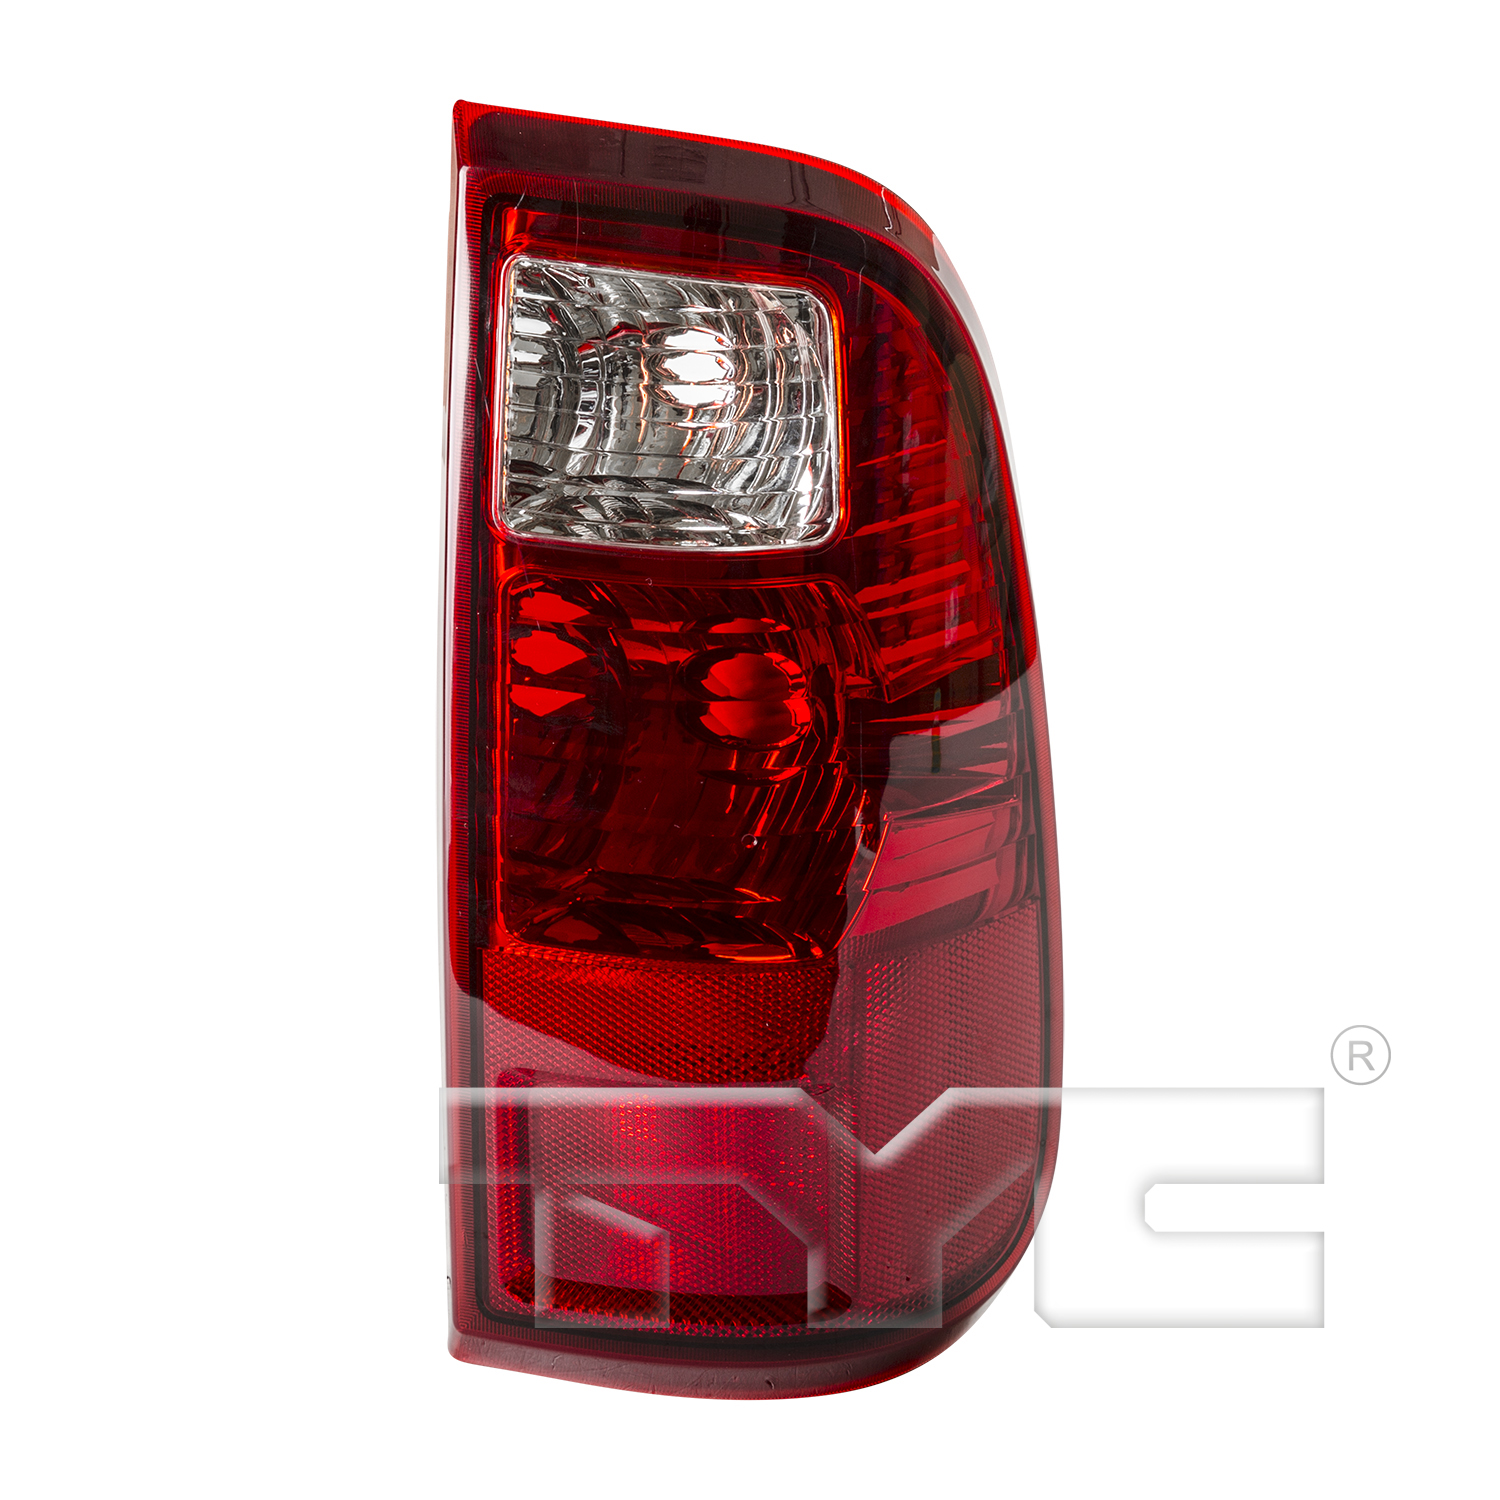 Aftermarket TAILLIGHTS for FORD - F-250 SUPER DUTY, F-250 SUPER DUTY,08-16,RT Taillamp assy